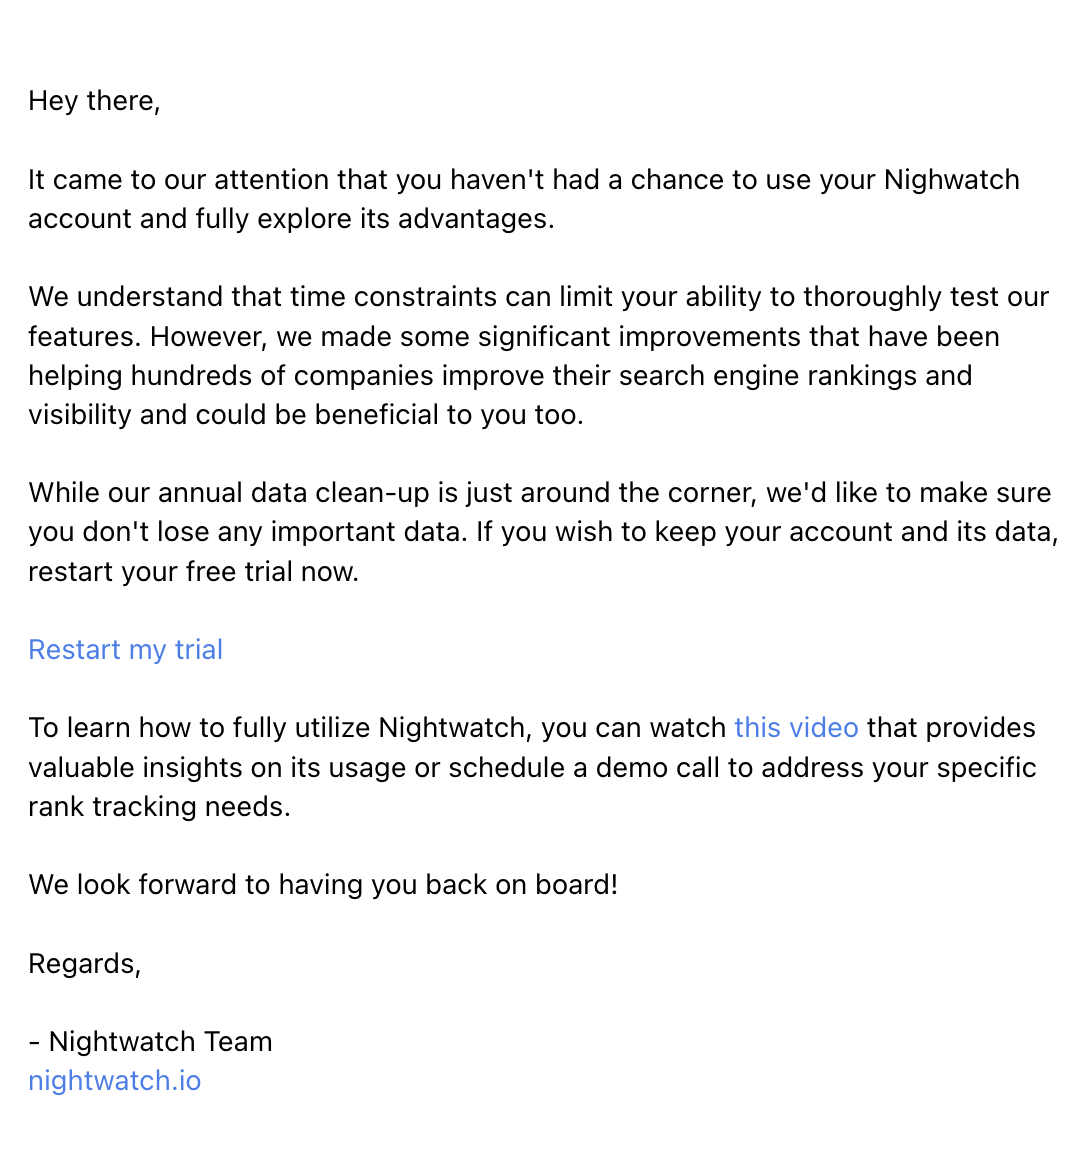 SaaS Re-engagement Emails: Screenshot of Nightwatch's email